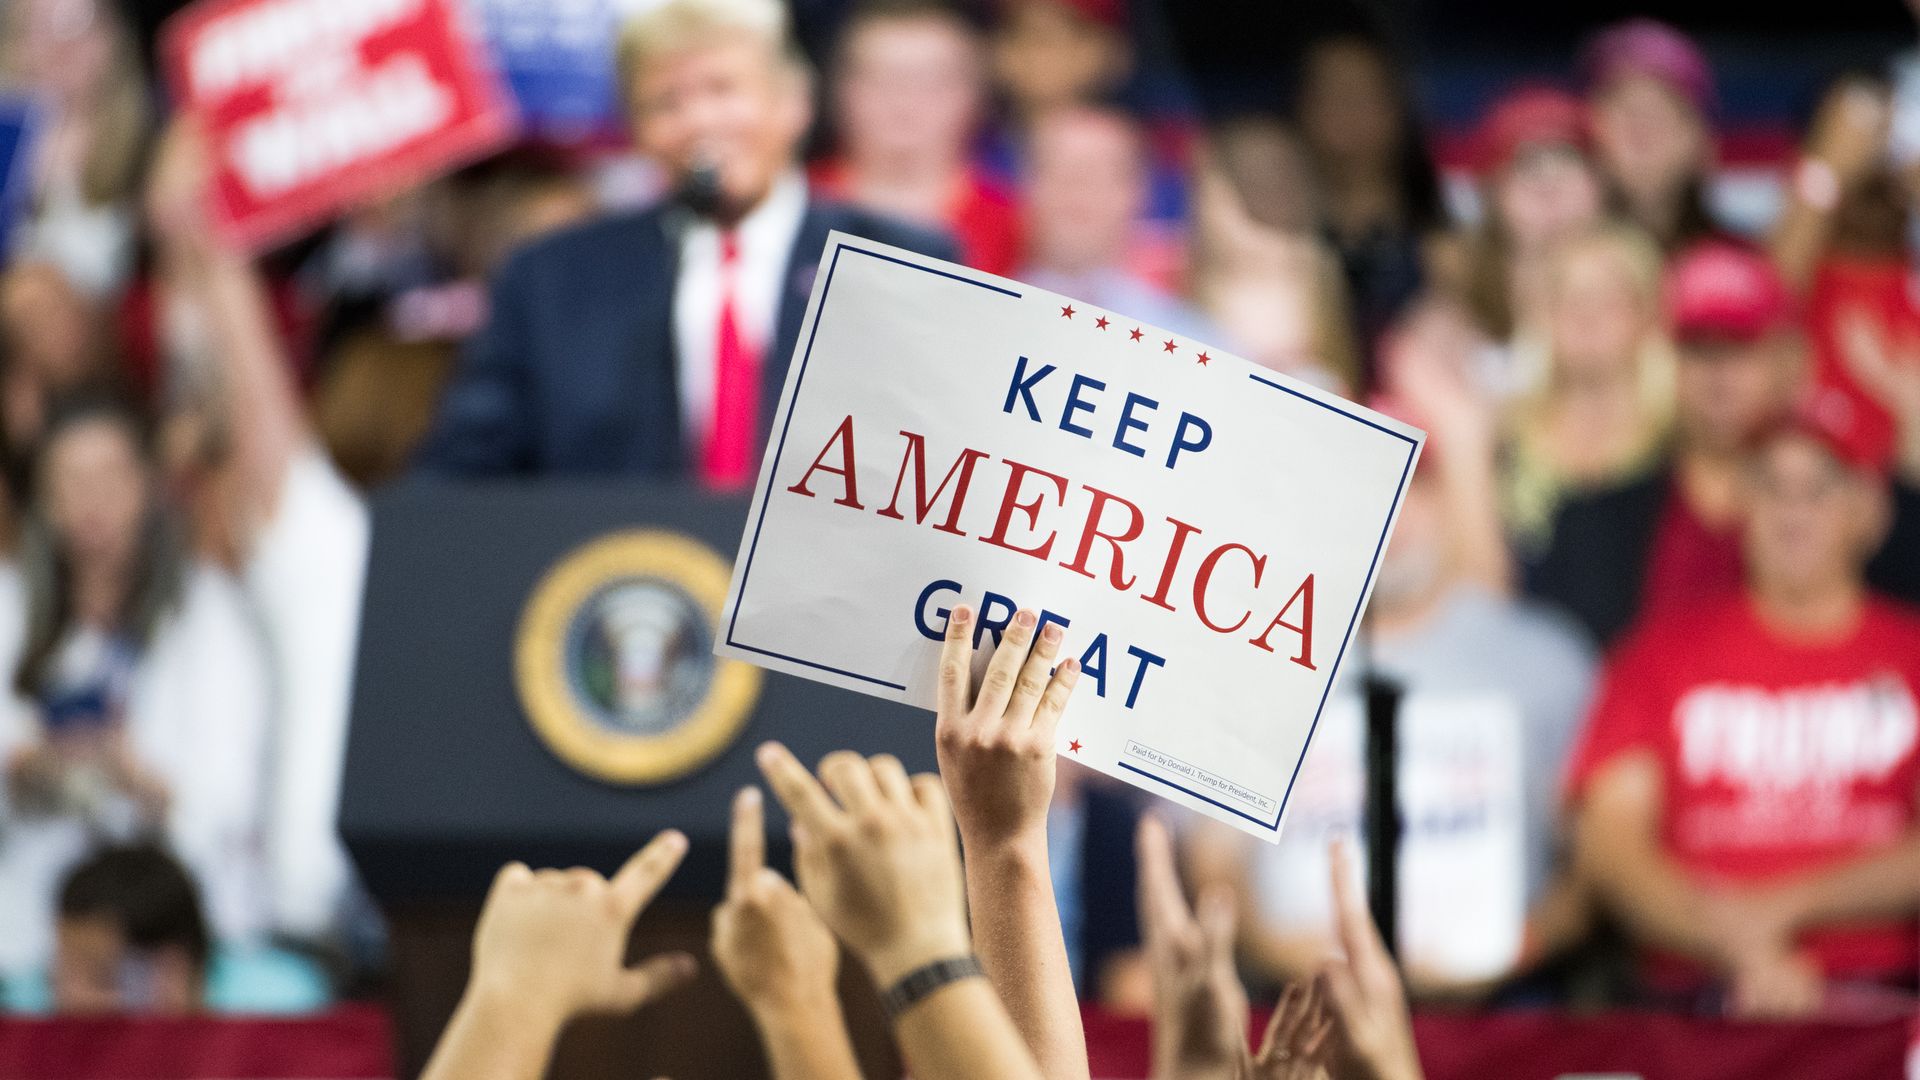 Supporters at a Trump rally hold up a "Keep America Great" sign